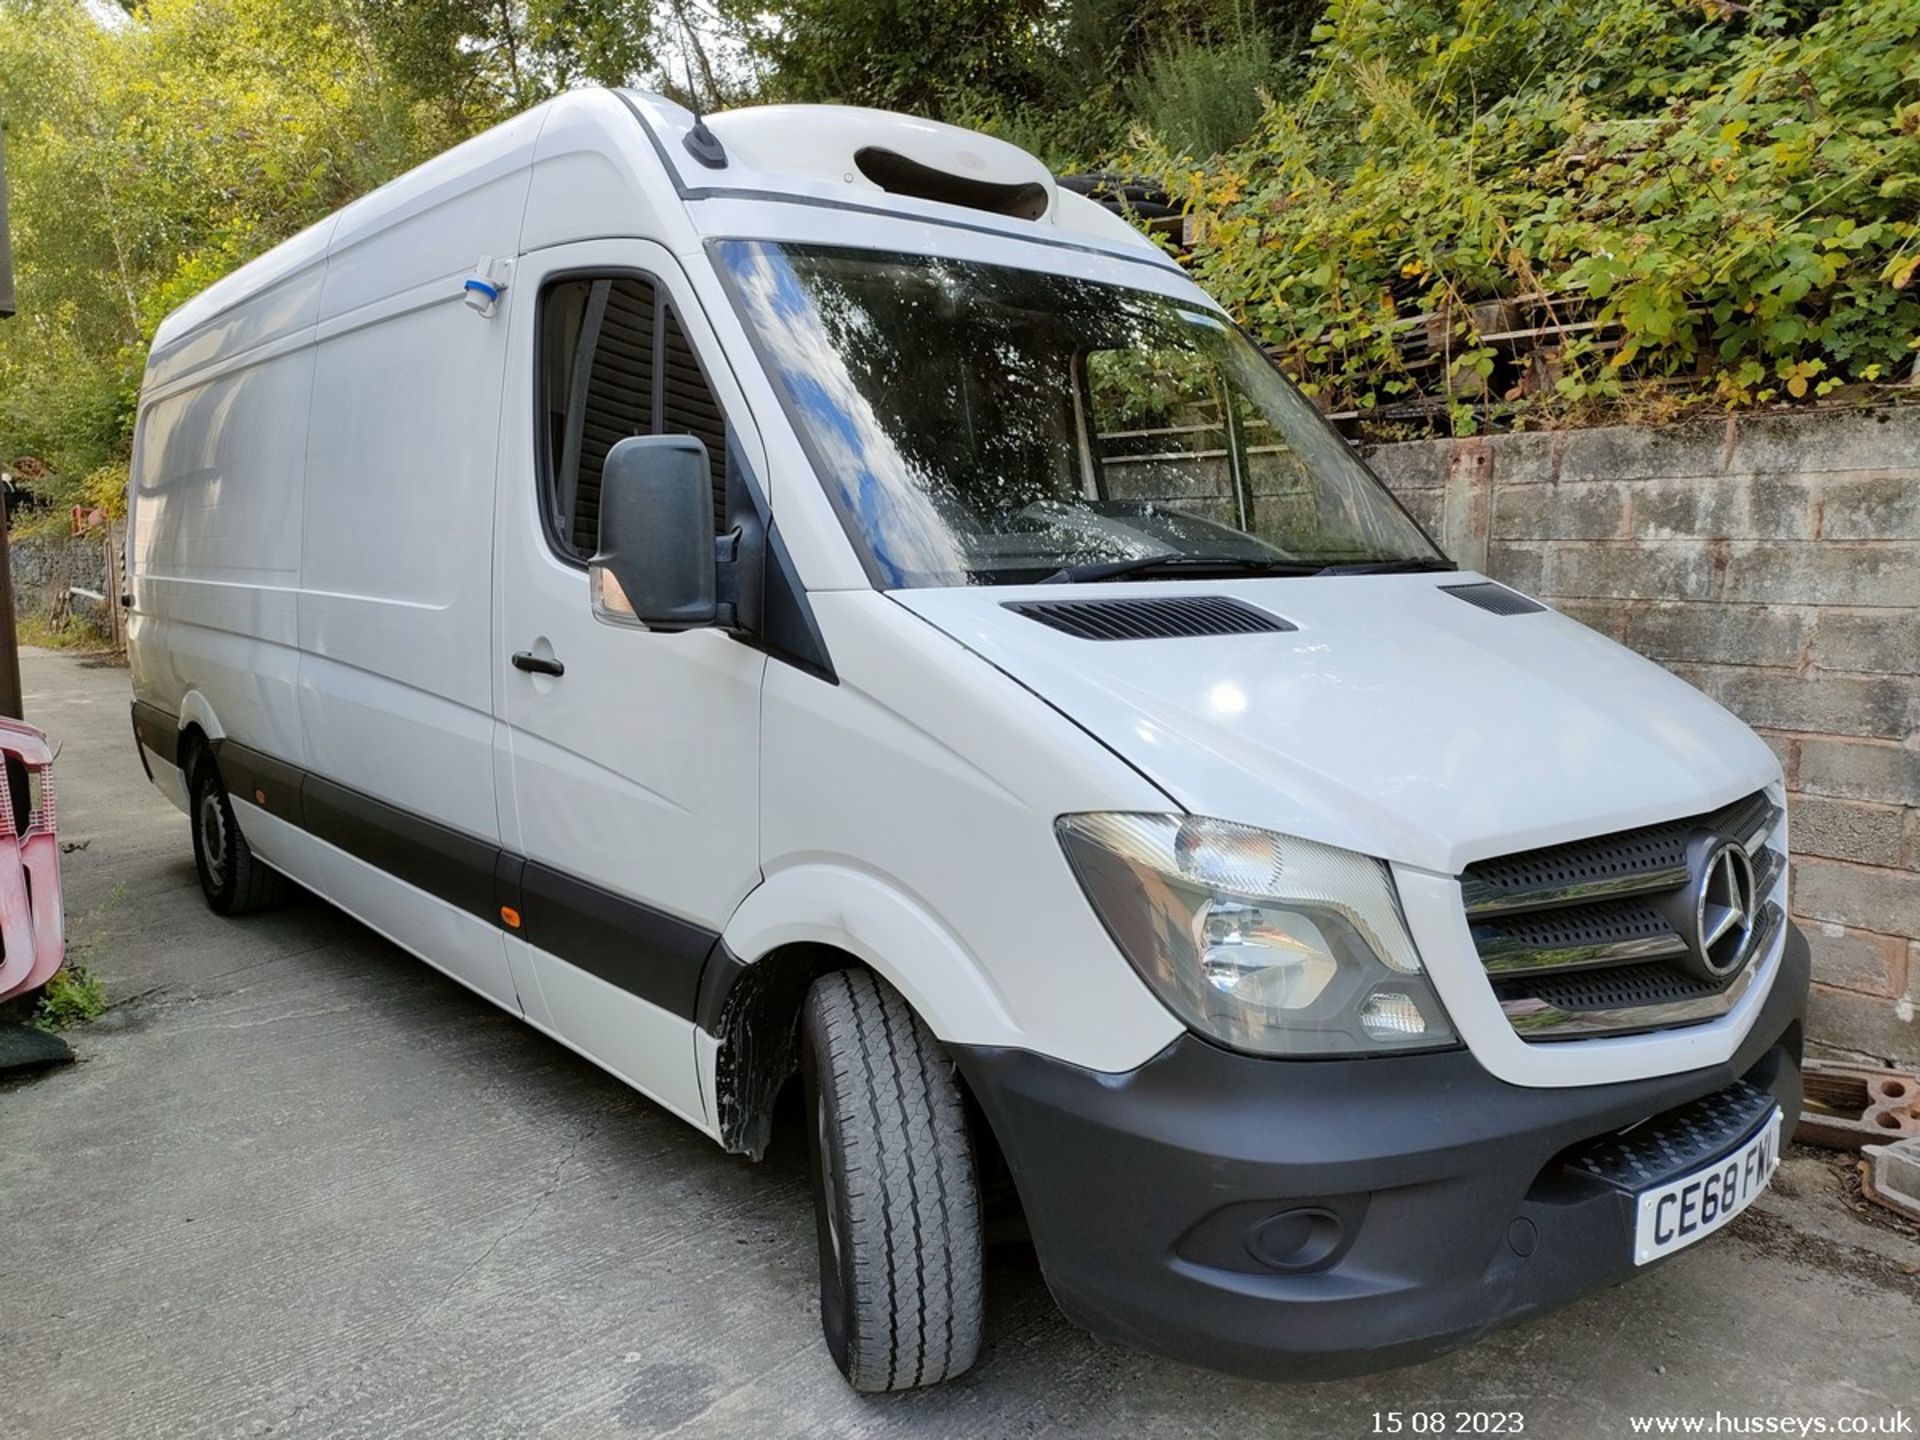 18/68 MERCEDES-BENZ SPRINTER 314CDI - 2143cc 5dr Refrigerated (White) - Image 37 of 40